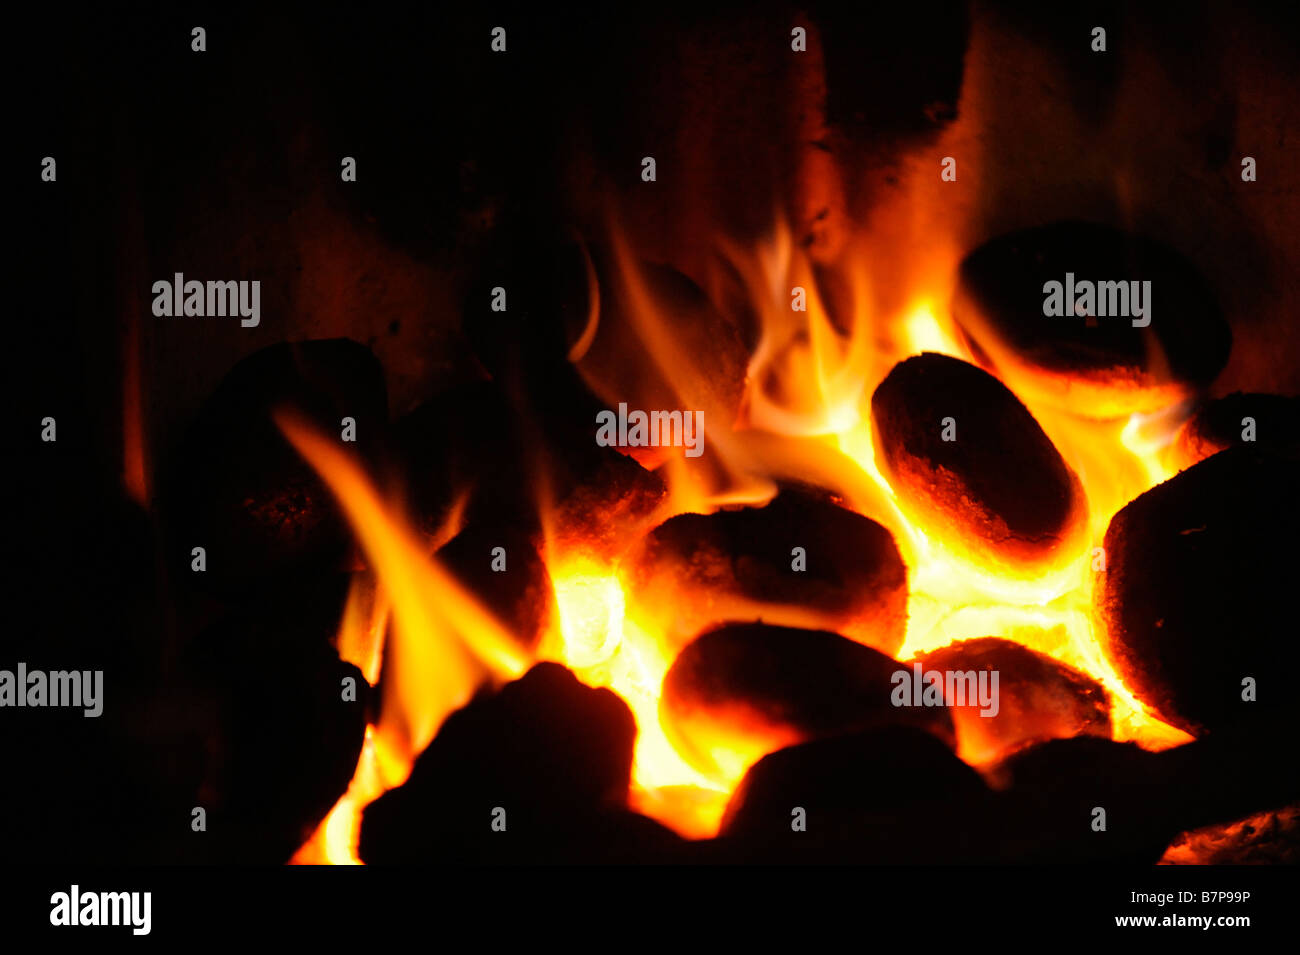 Smokeless coal burning in a grate of a domestic home in a smokeless zone during cold weather. Stock Photo